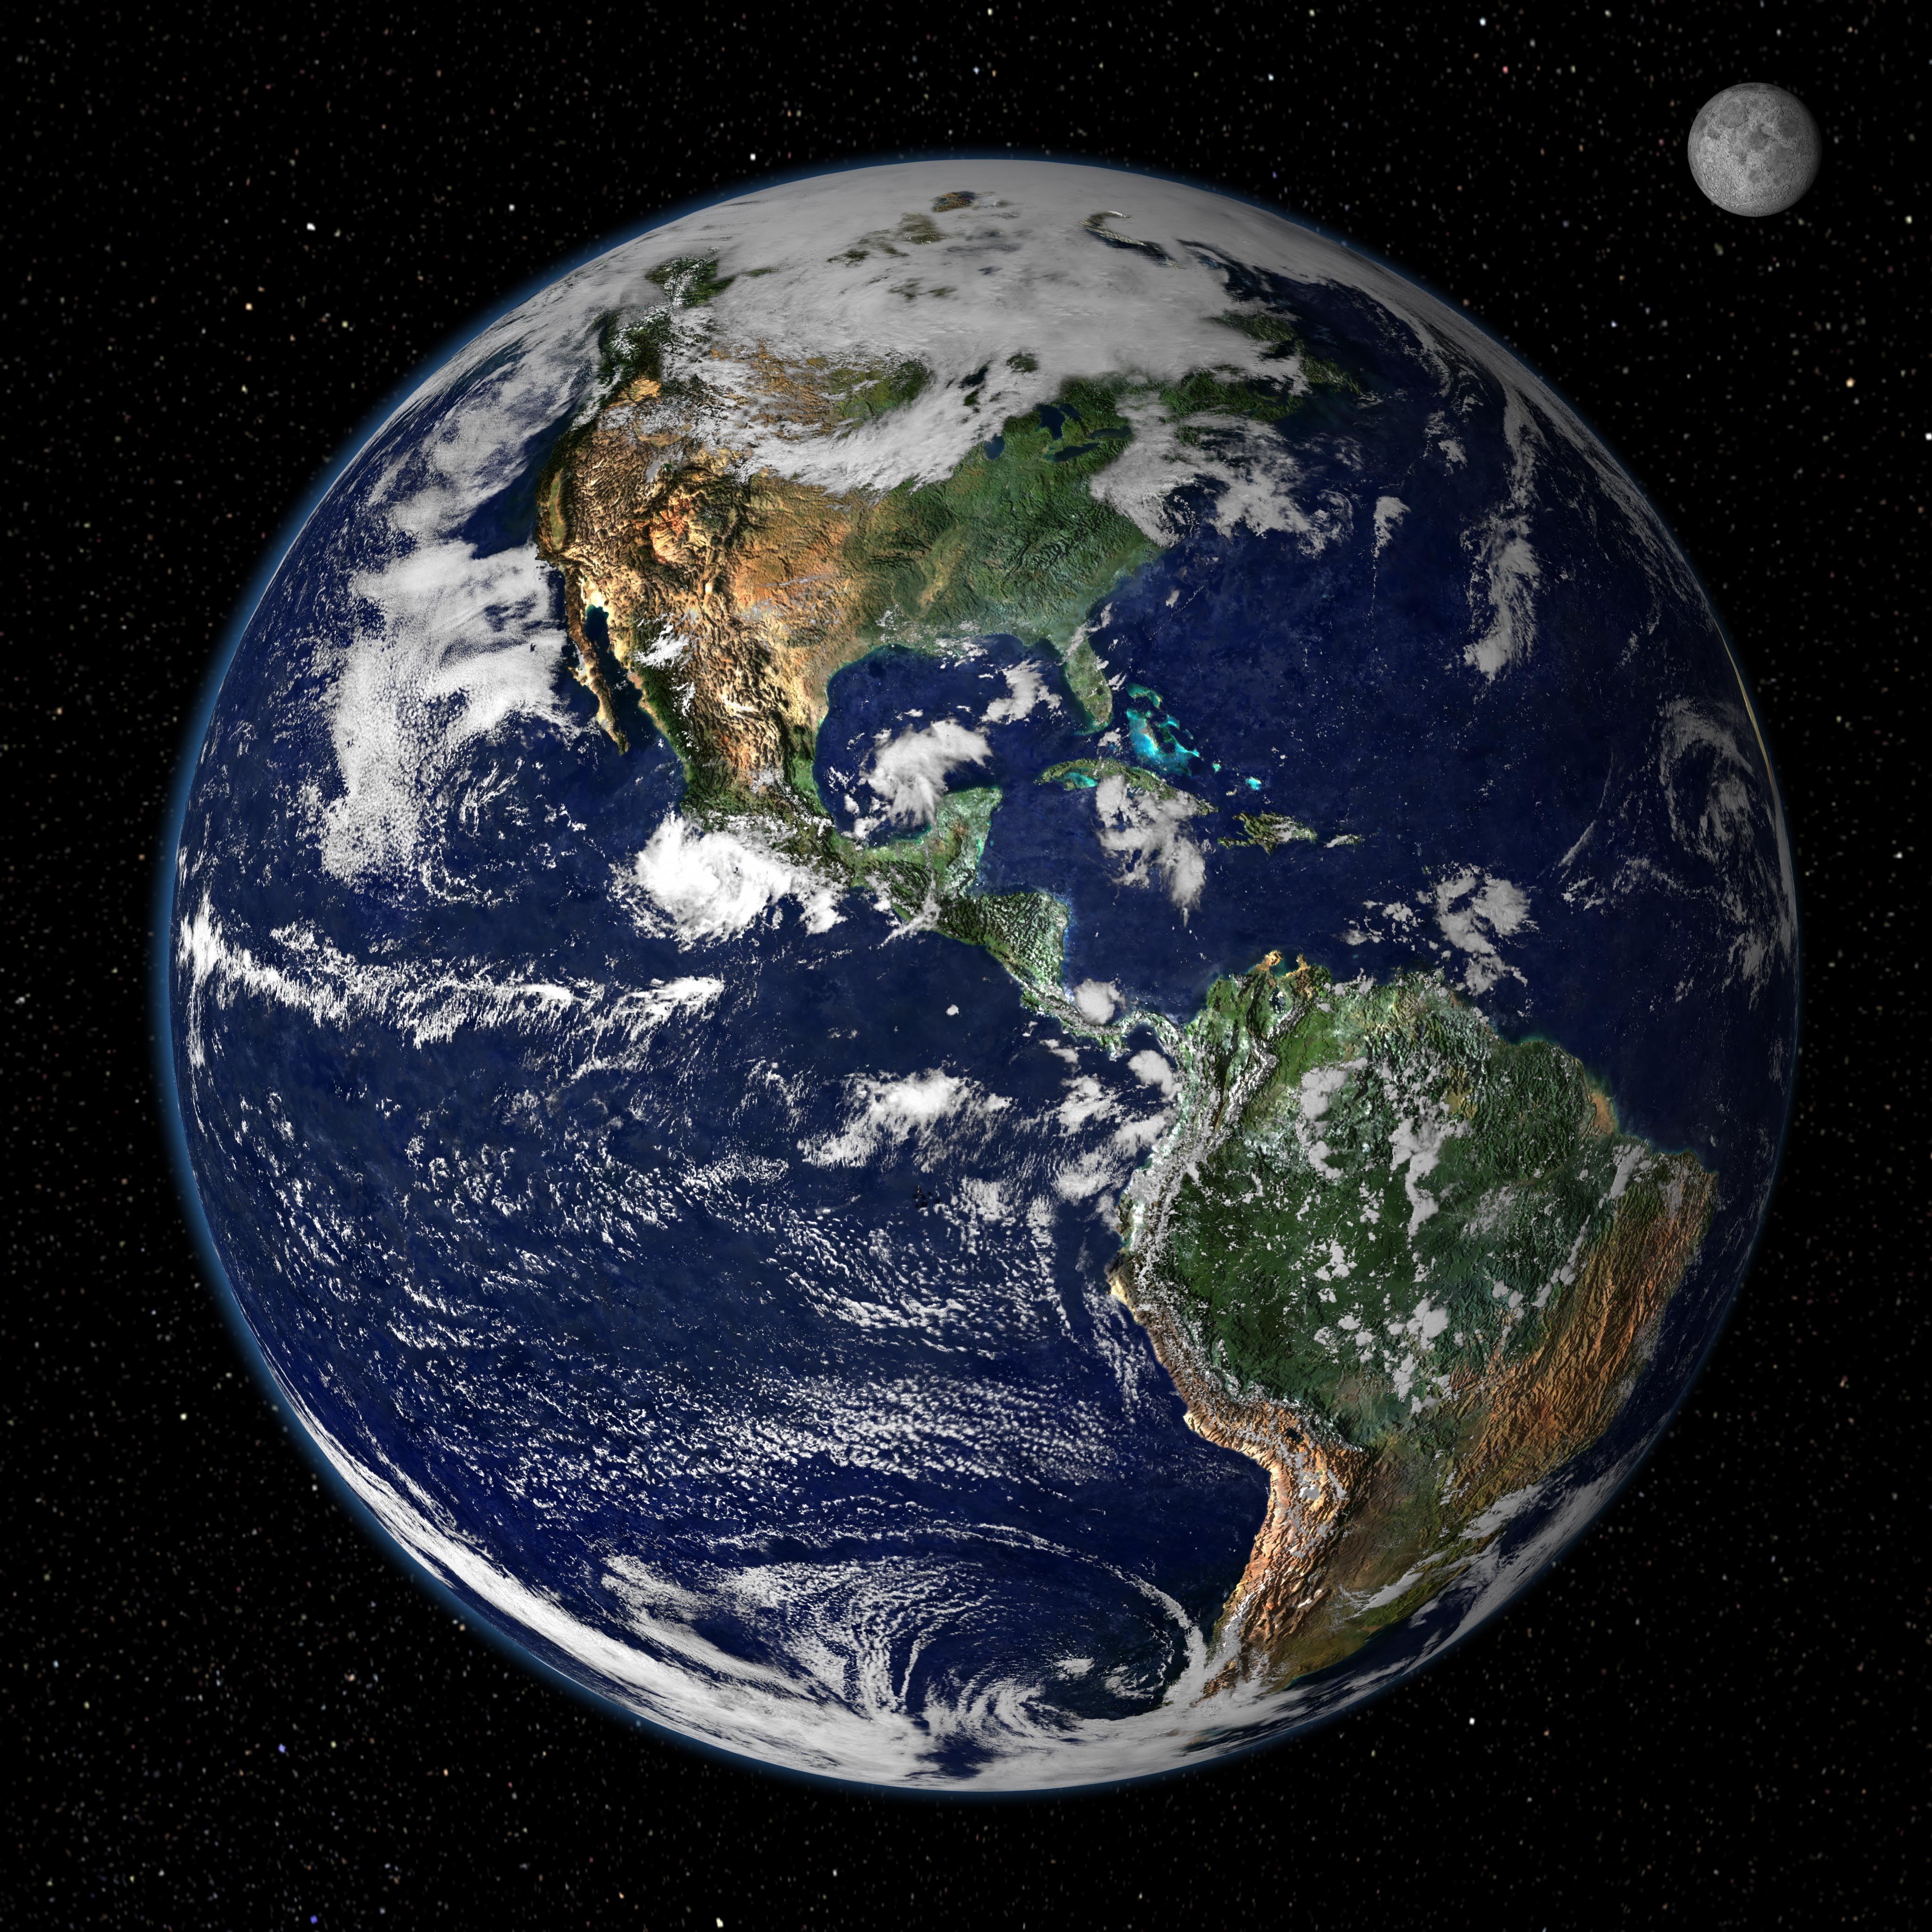 File:Earth from Space jpg - Wikimedia Commons